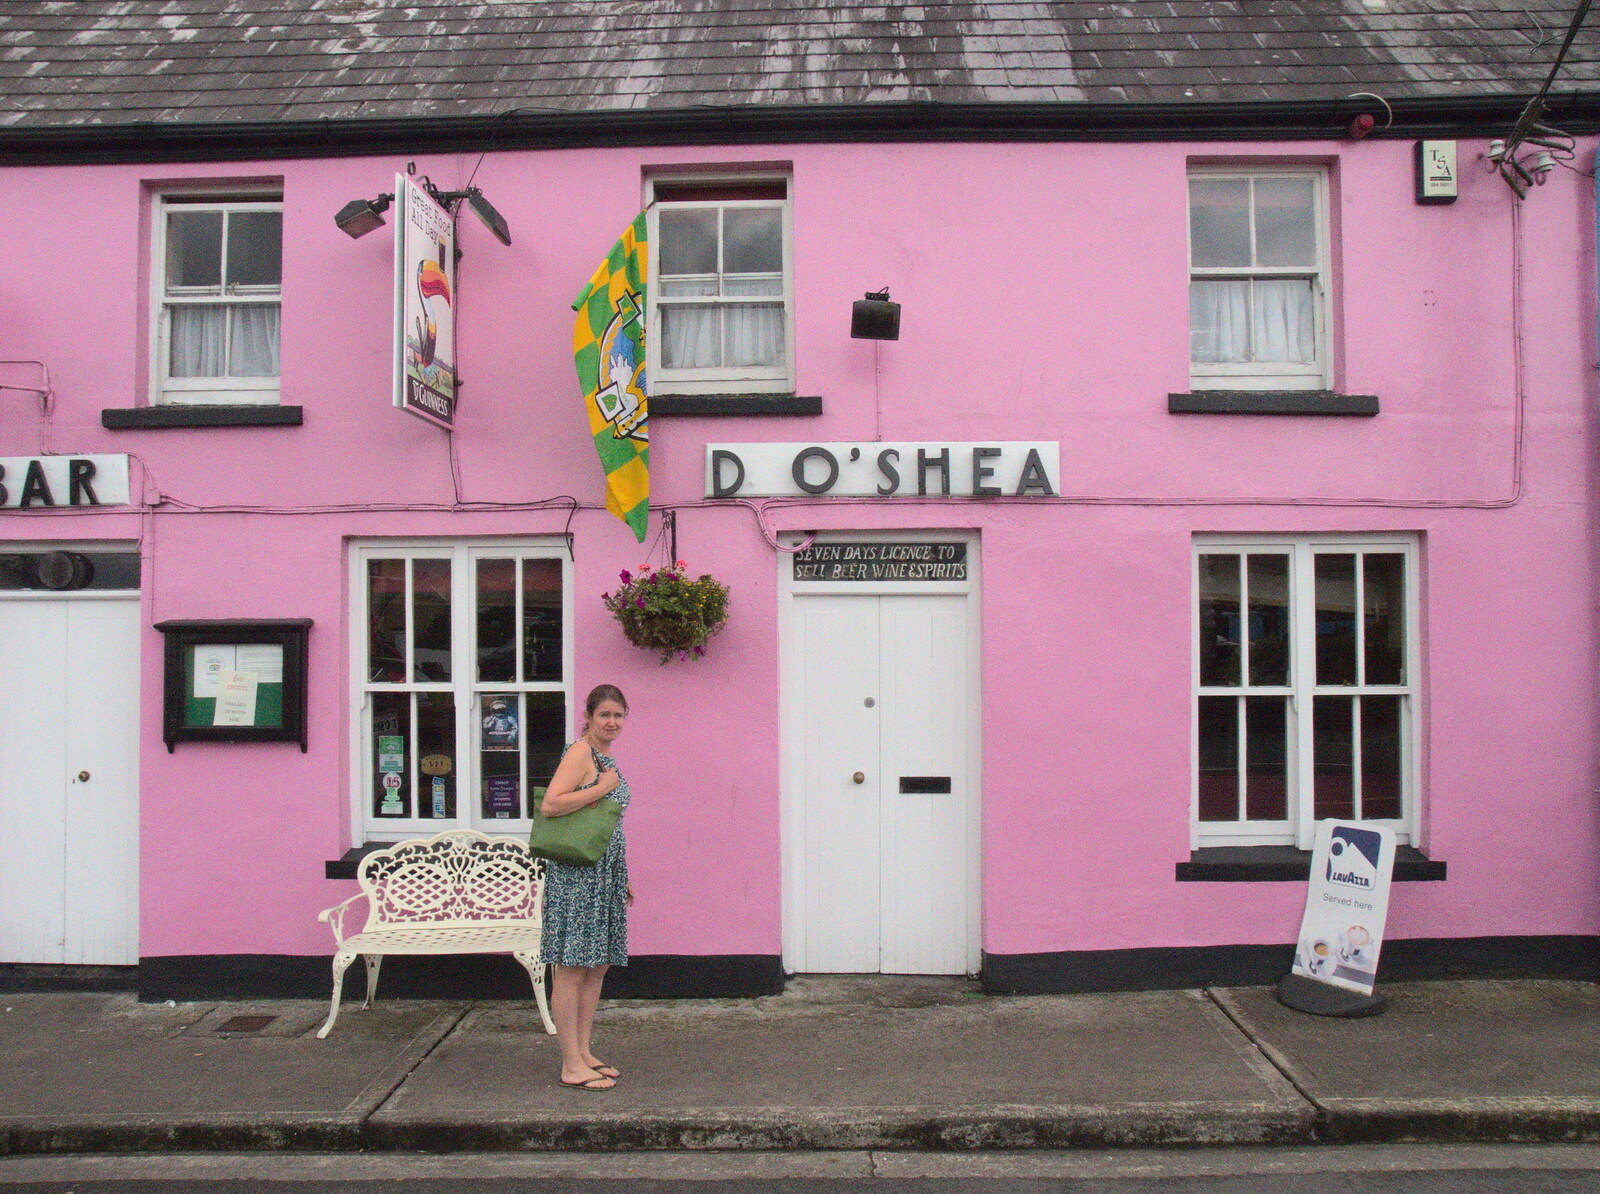 Isobel outside O'Shea's from A Seafari Boat Trip, Kenmare, Kerry, Ireland - 3rd August 2017